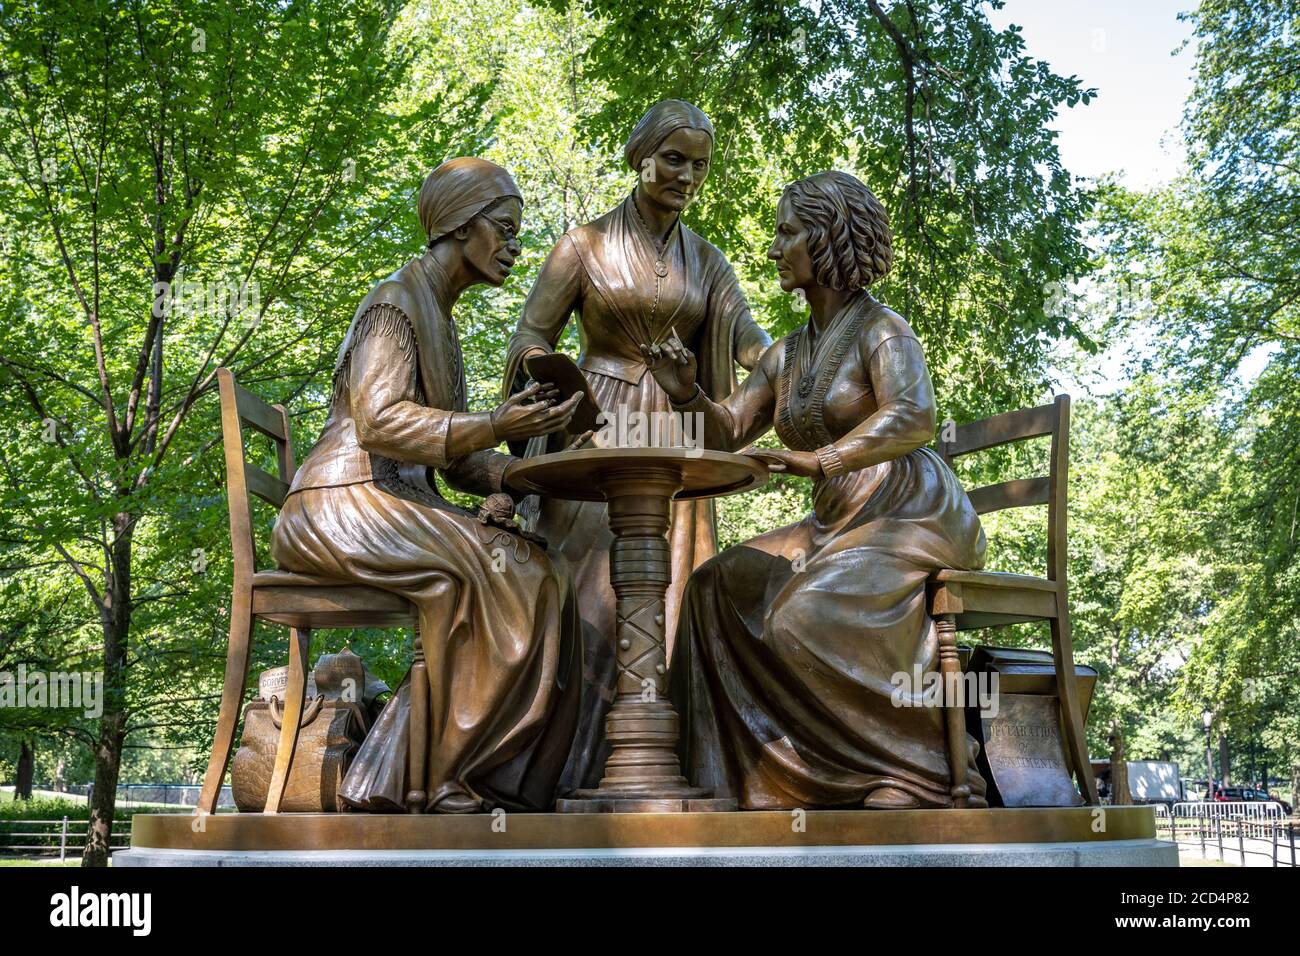 New York, USA. 26th Aug, 2020. The new statue 'The Women's Rights Pioneers Monument' moments after it was unveiled in New York city. The first monument added to Central Park since 1965 consists of bronze figures of women's rights activists Sojourner Truth, Susan B. Anthony, and Elizabeth Cady Stanton and it's also the first monument in Central Park to depict actual women. Credit: Enrique Shore/Alamy Live News Stock Photo